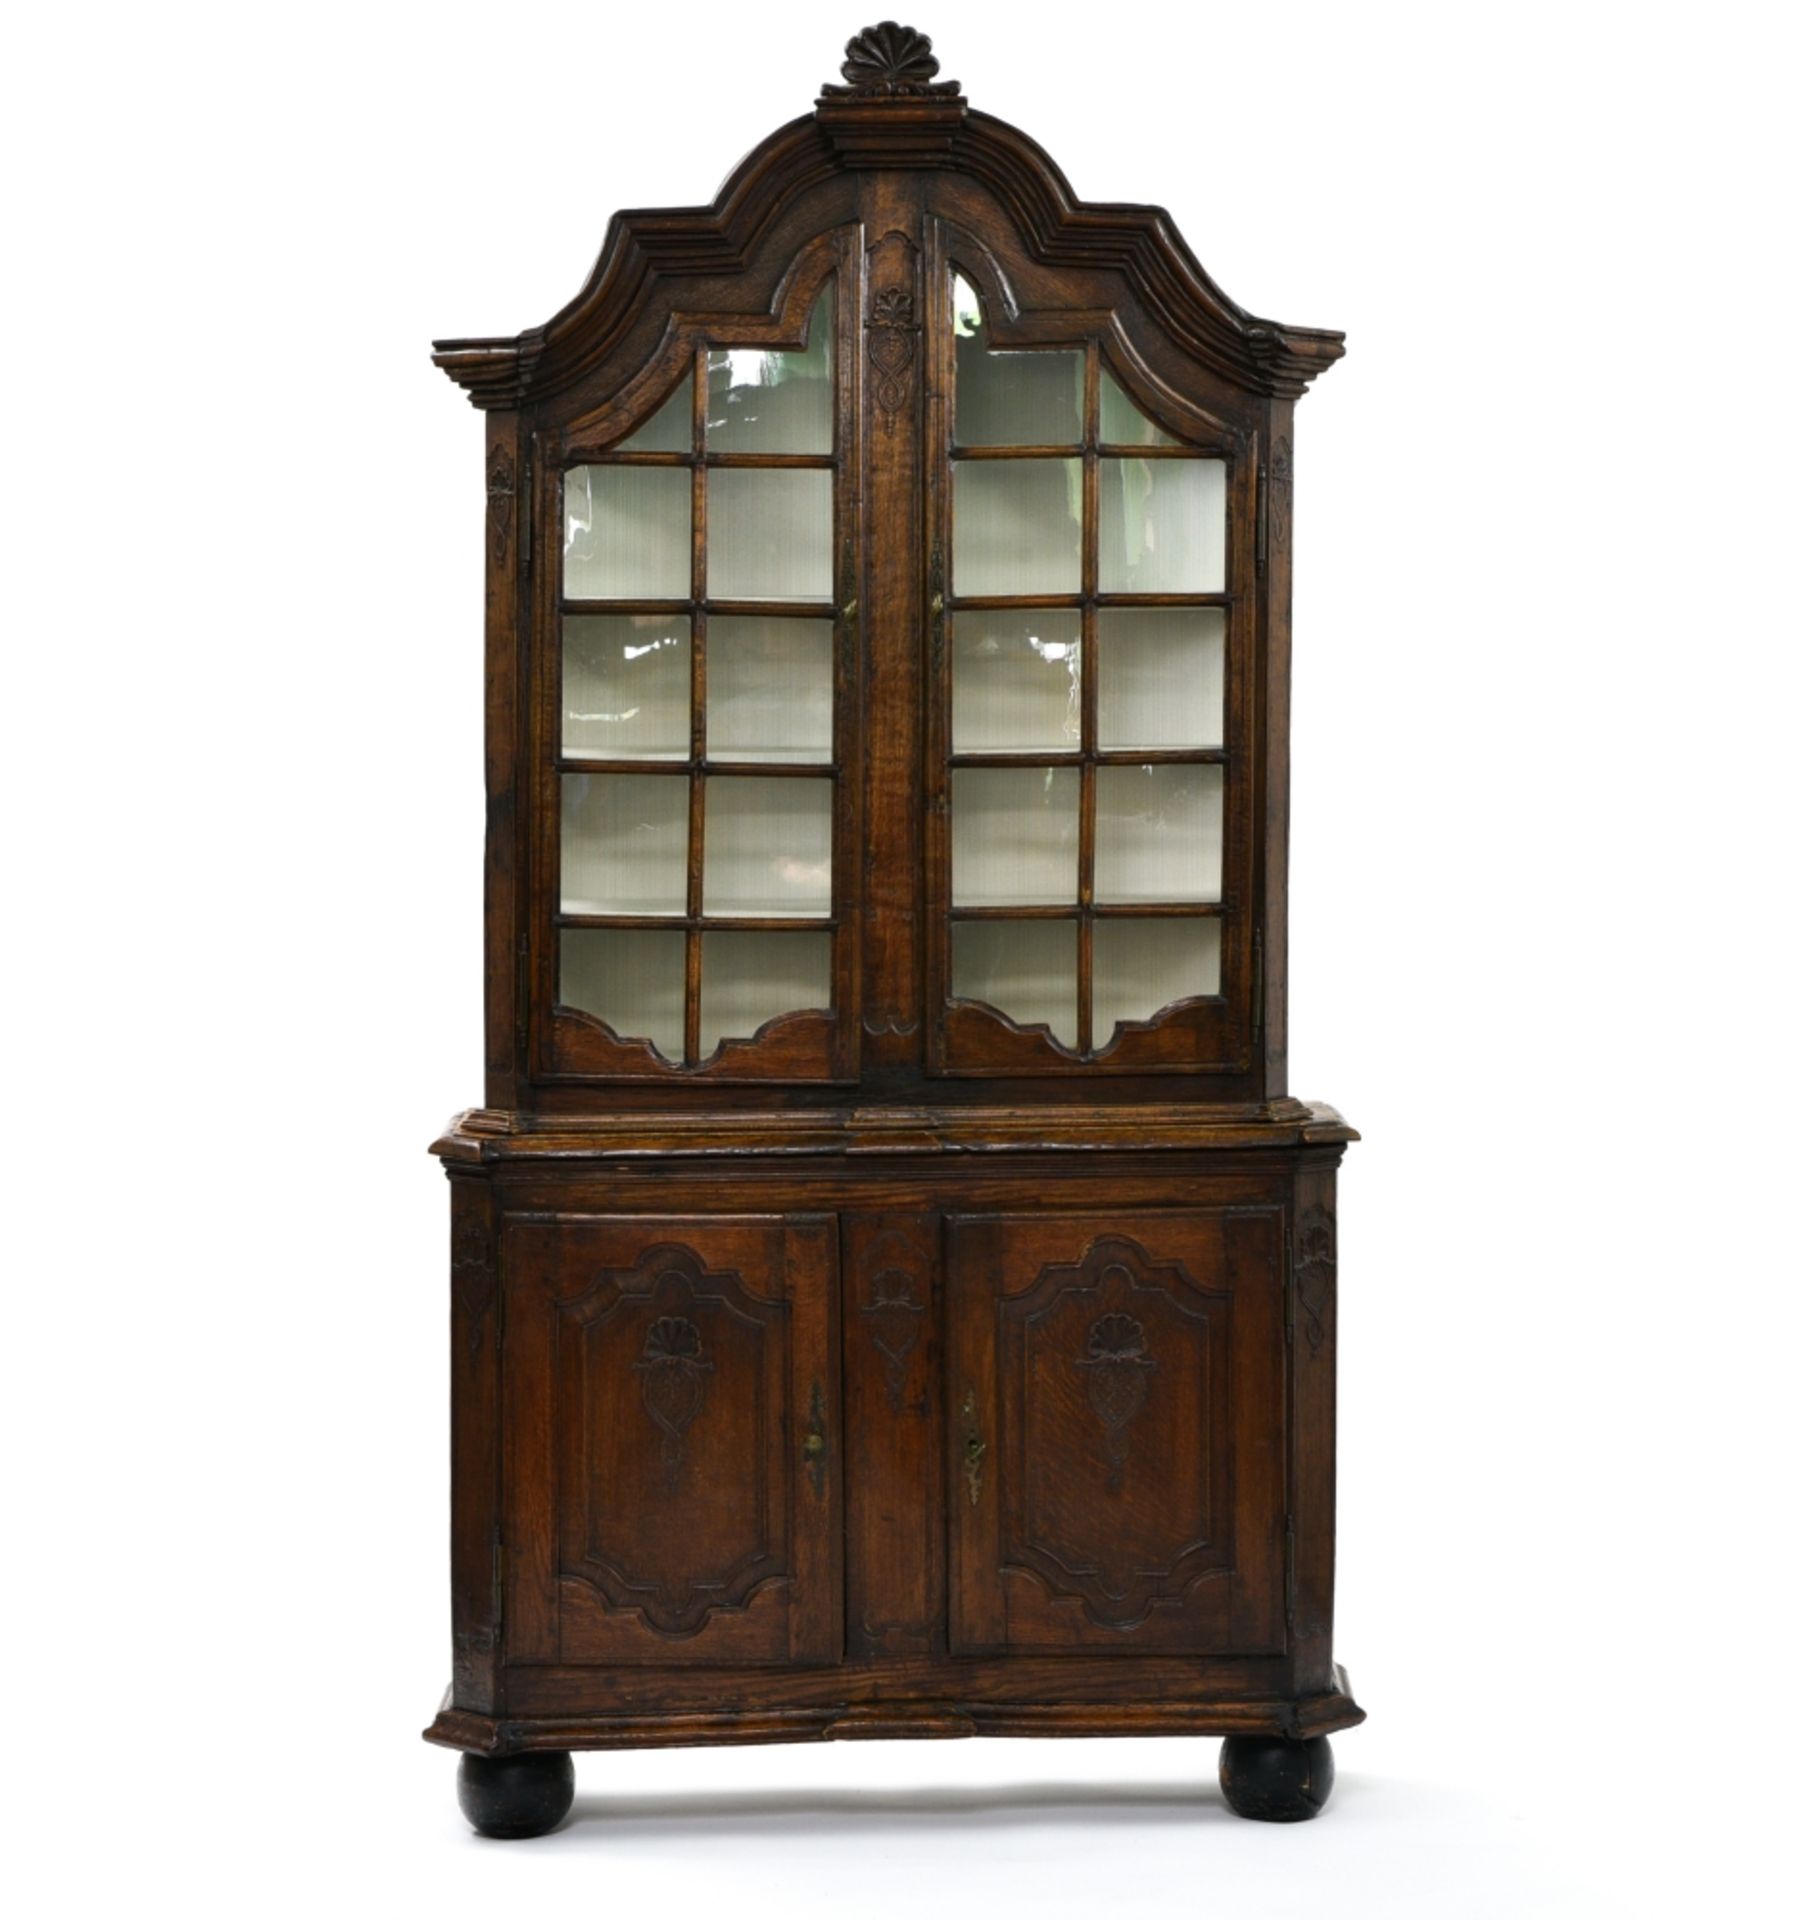 Double-bodied secretary LIEGE, 18TH CENTURY Carved and moulded oak, composed of an upper display